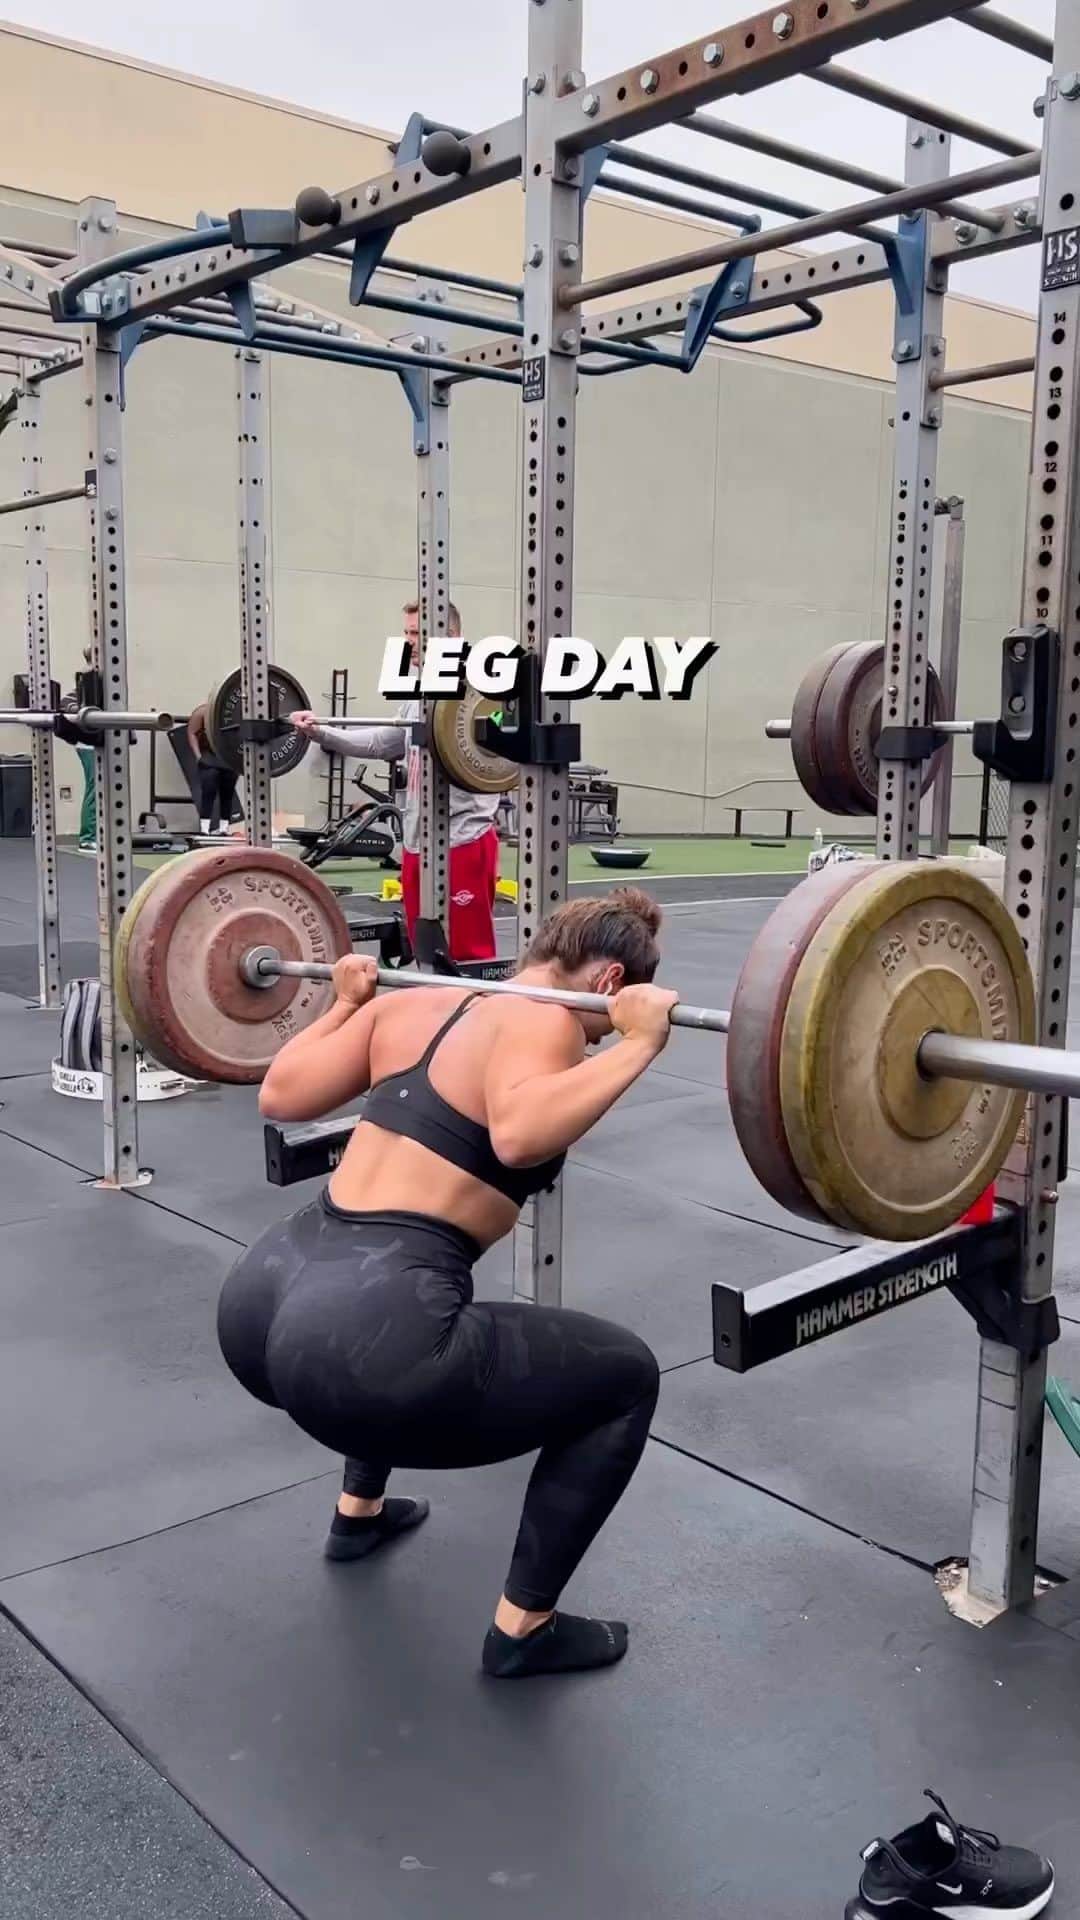 Squatsのインスタグラム：「Leg Day Workout 🍑 - @bodybyzizzo  #squats #legs #glutes #fitness #gym #workout #fitnessmotivation #fit #motivation #bodybuilding #training #health #healthylifestyle #gymlife #gymmotivation #healthy #muscle #fitnessmodel #exercise #weightloss #fitnessjourney #fitfam」